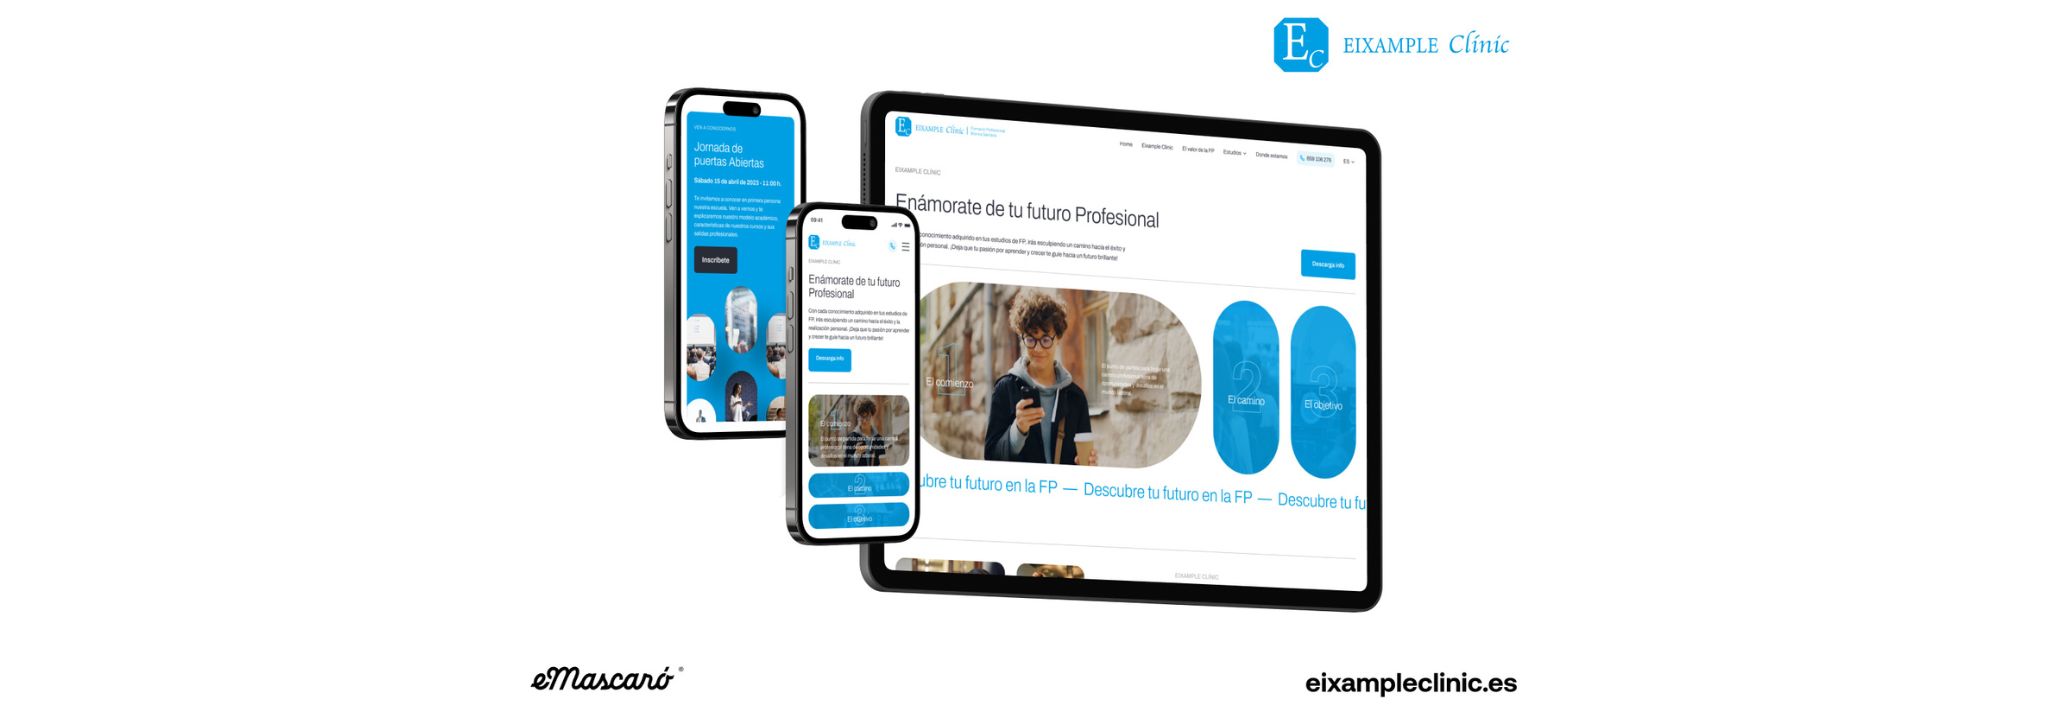 Eixample Clinic launched its new original digital project